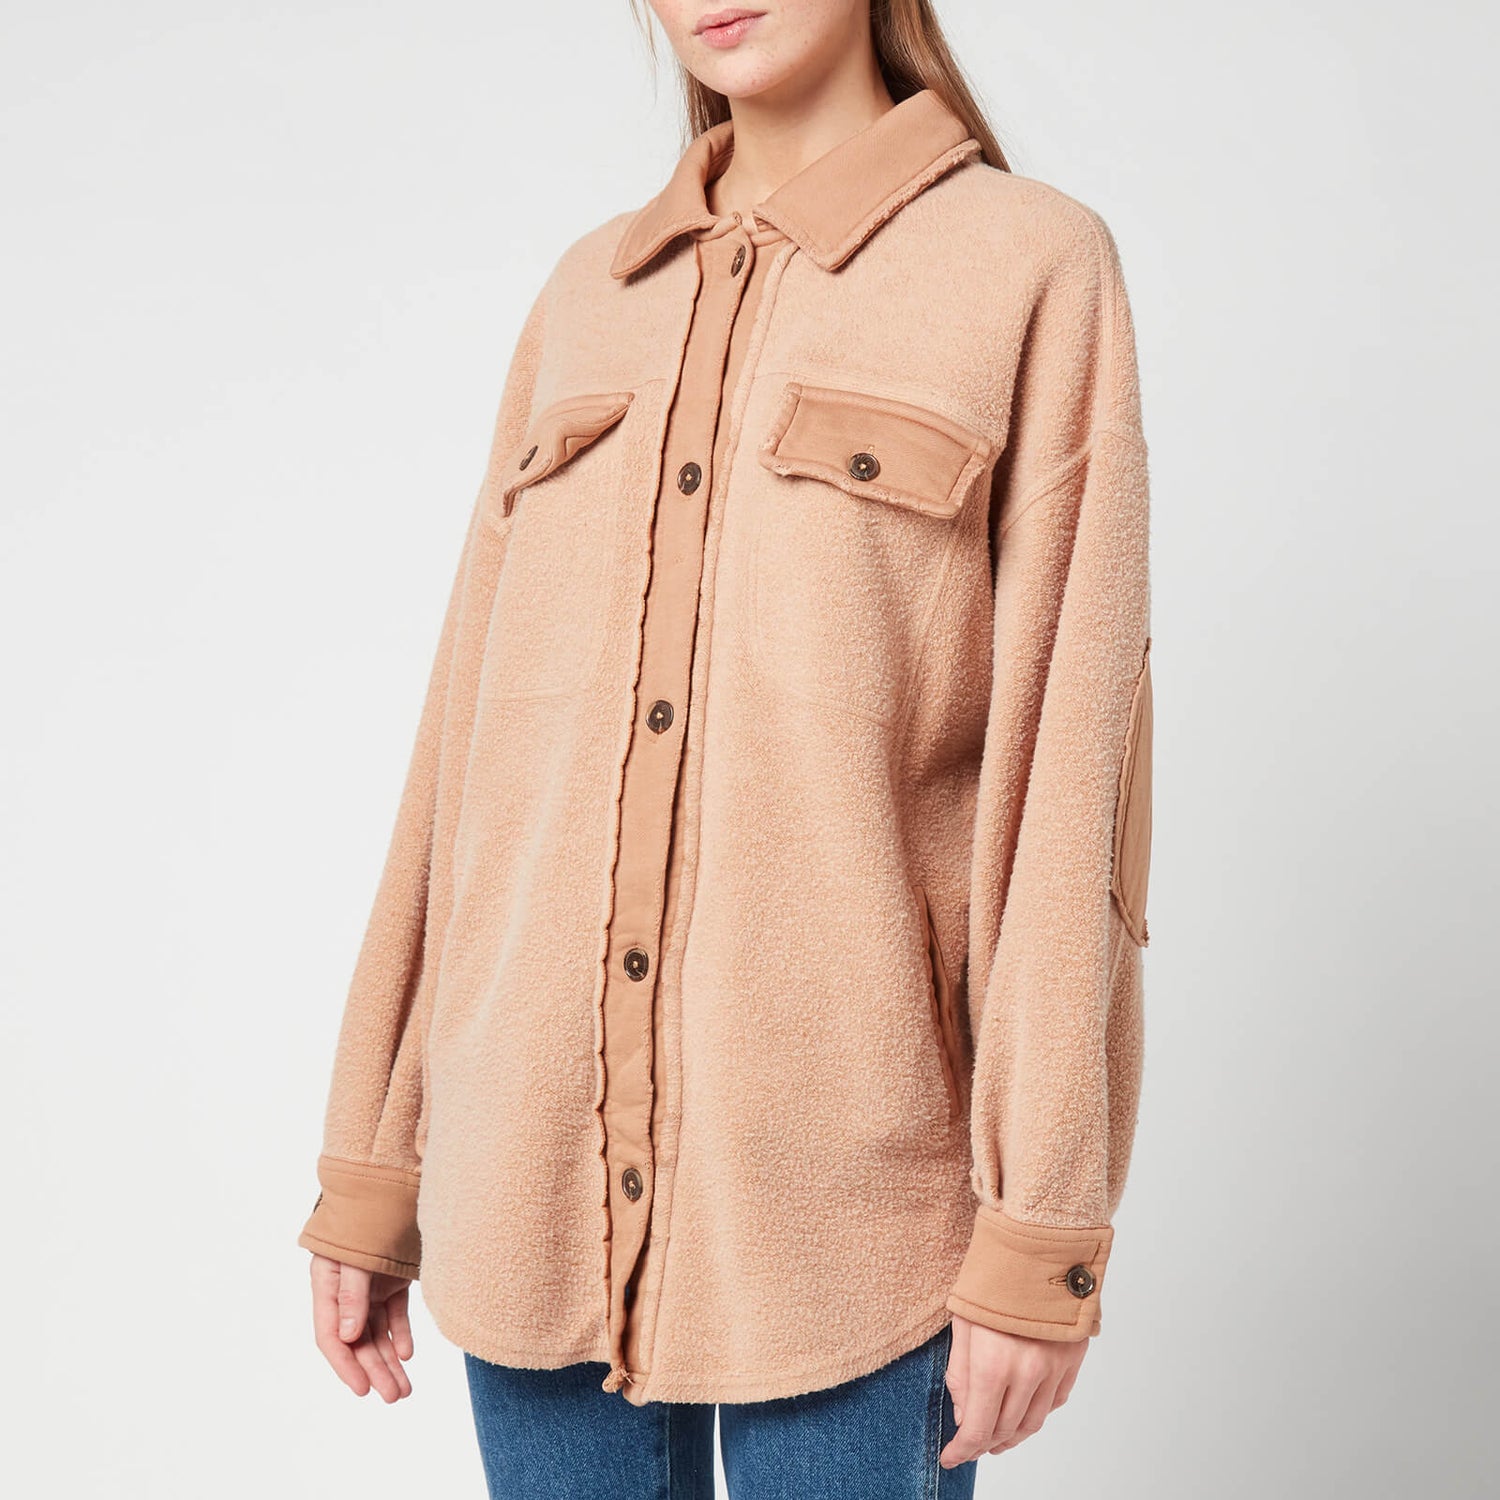 Free People Women's Ruby Jacket - Farther Shores